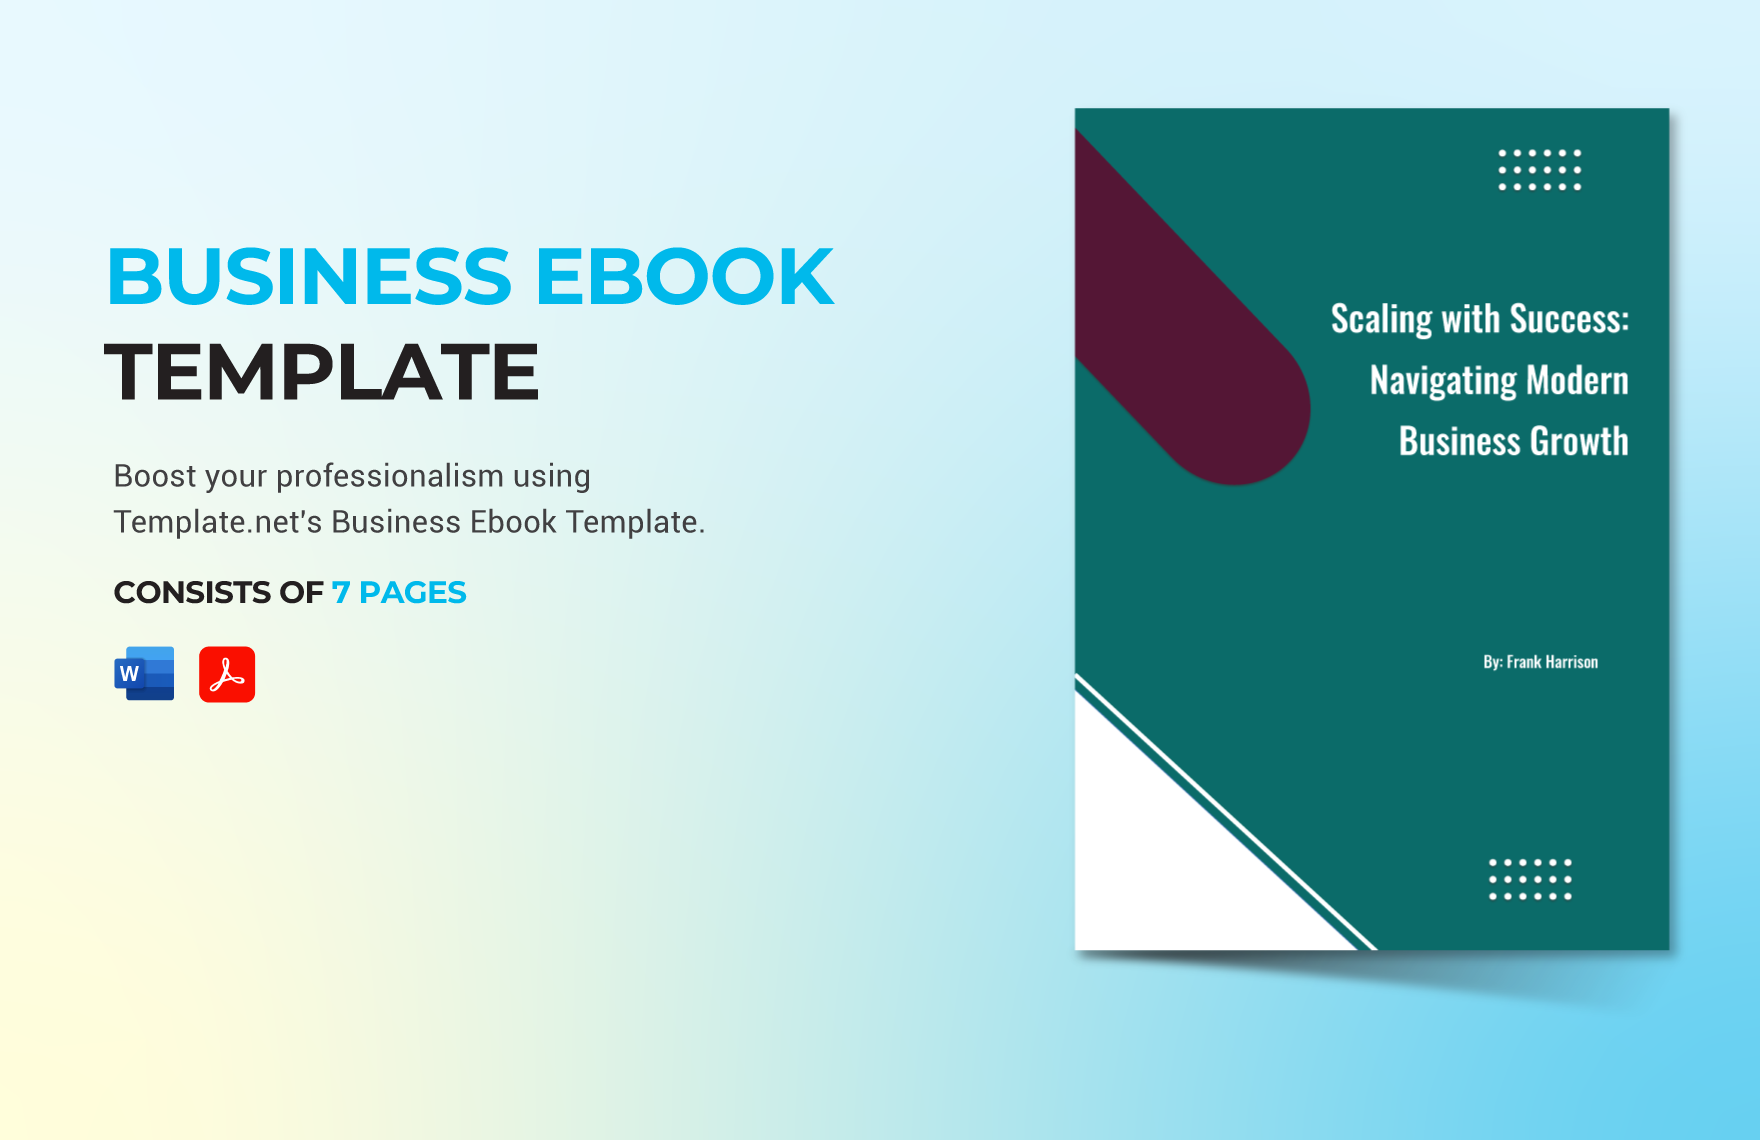 Business Ebook Template in Word, PDF